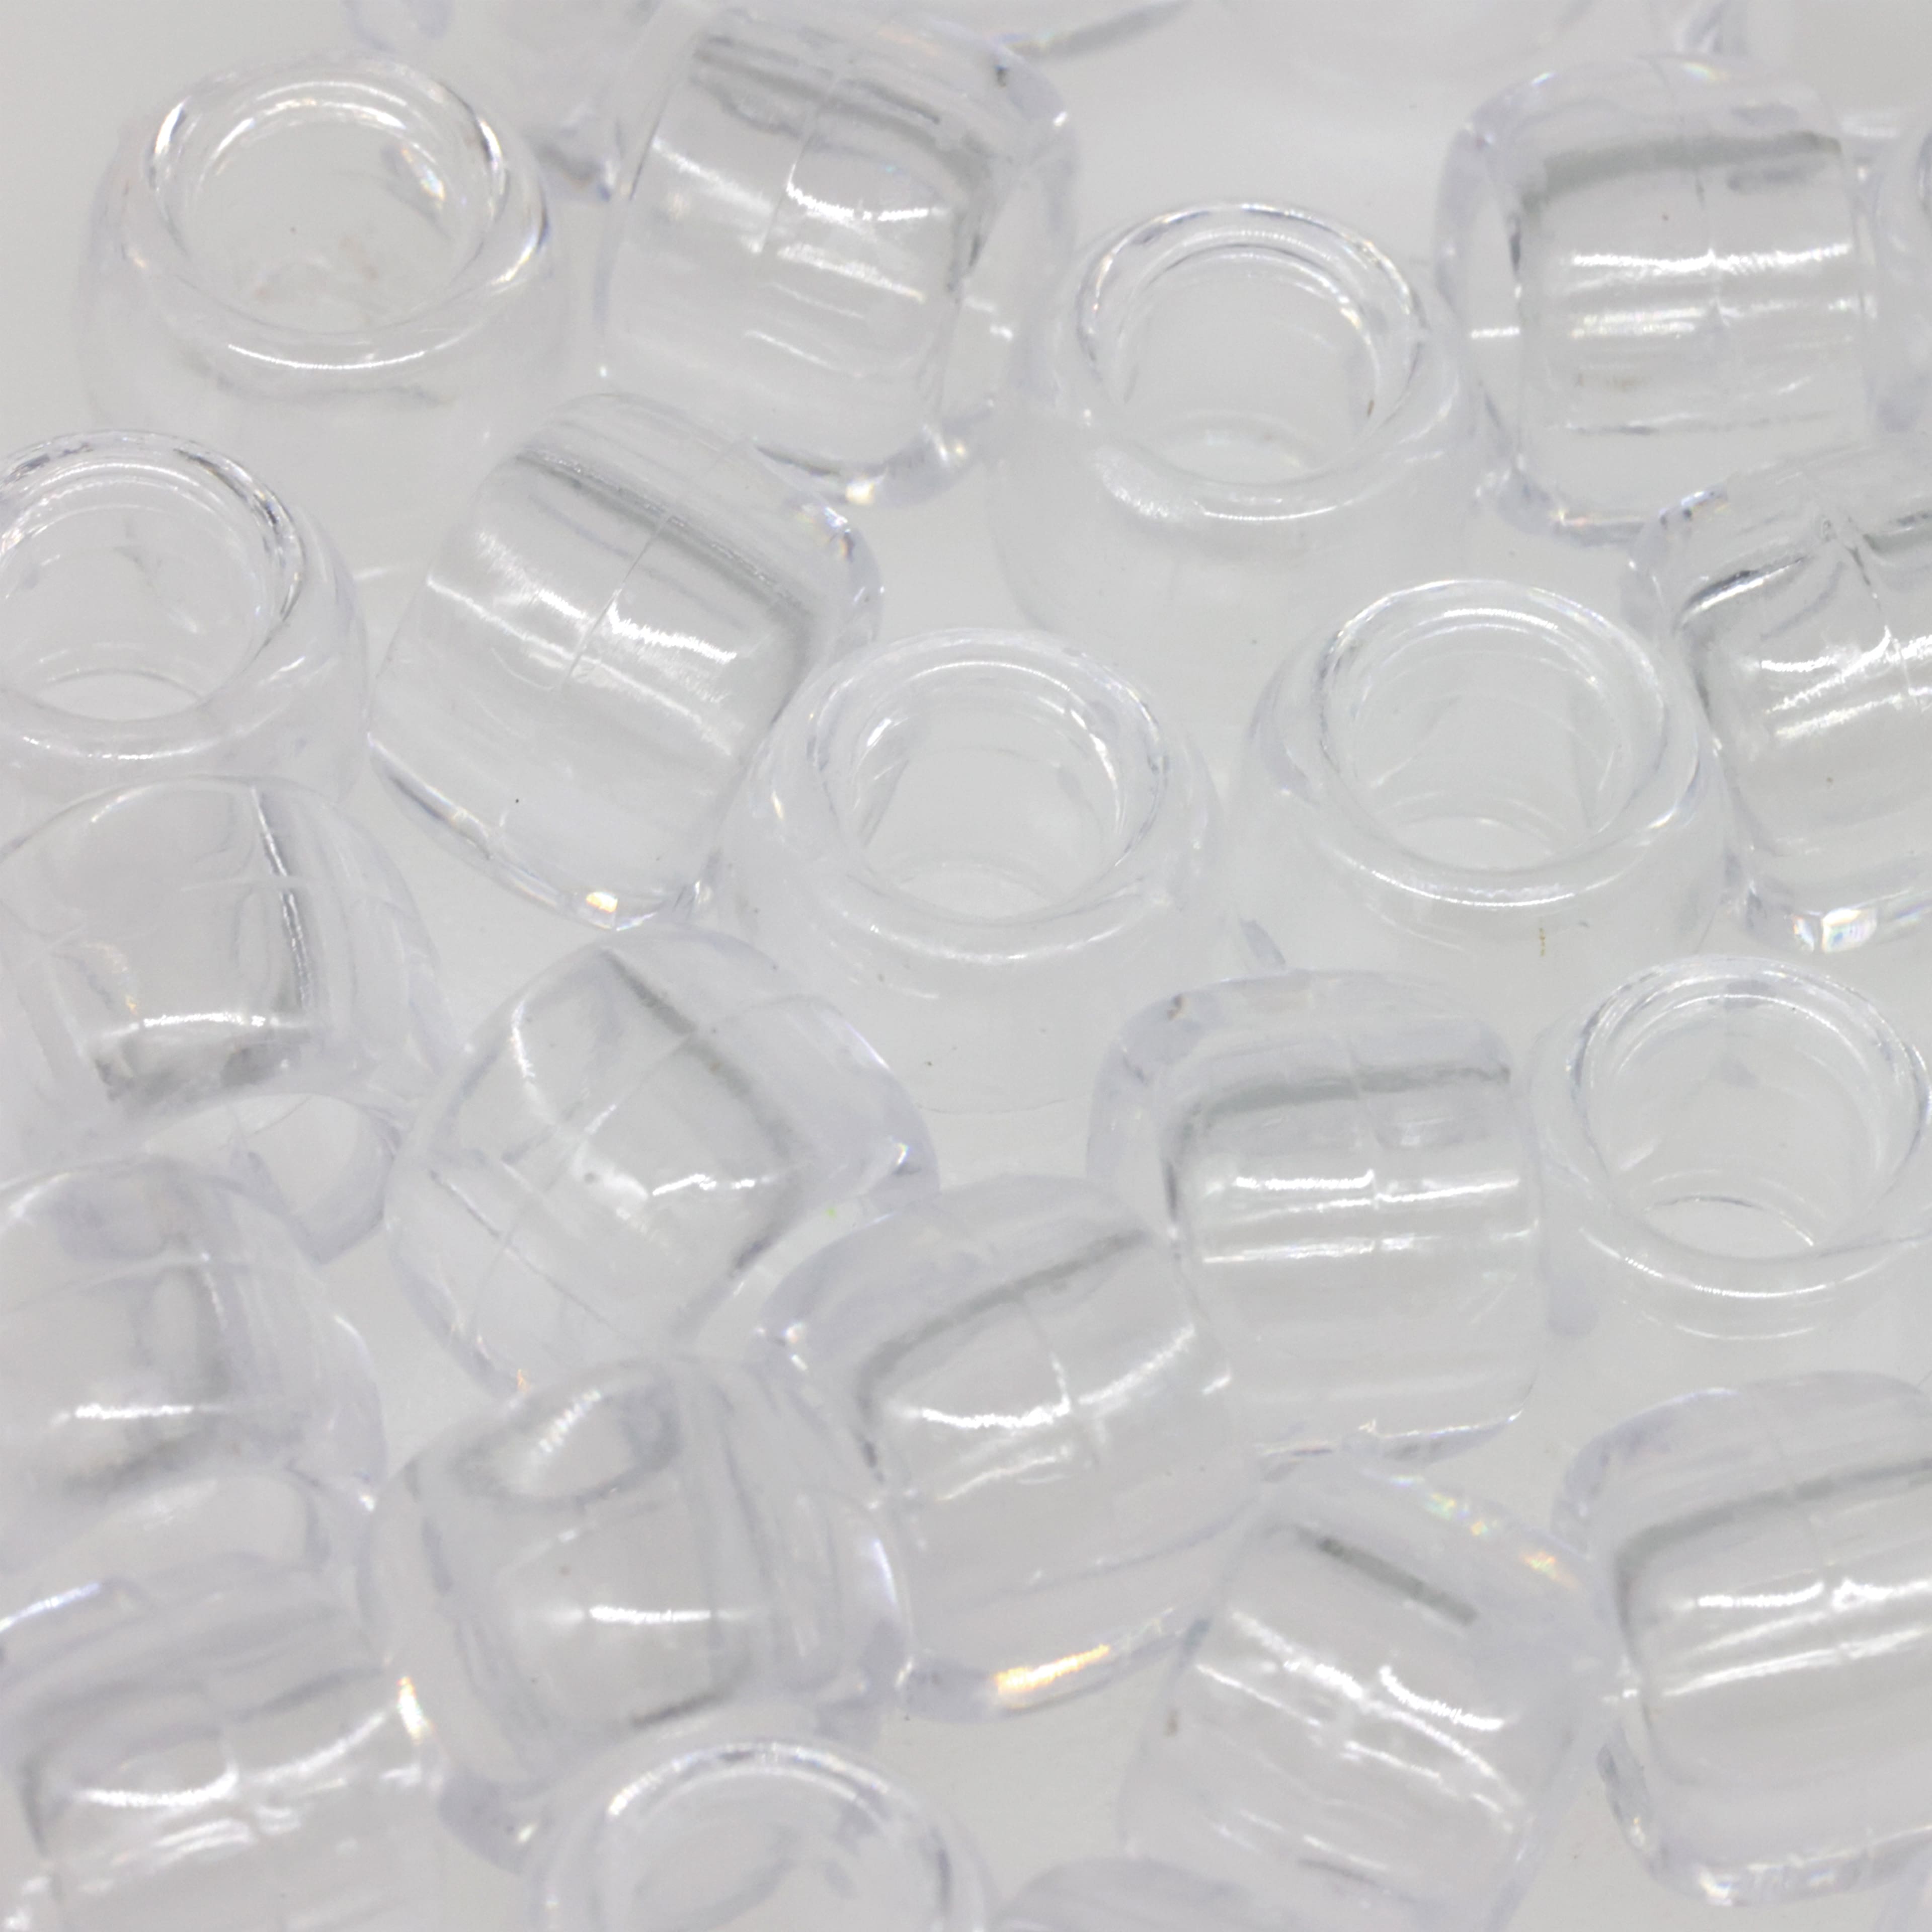 Crystal Clear Pony Beads by Creatology™, 6mm x 9mm